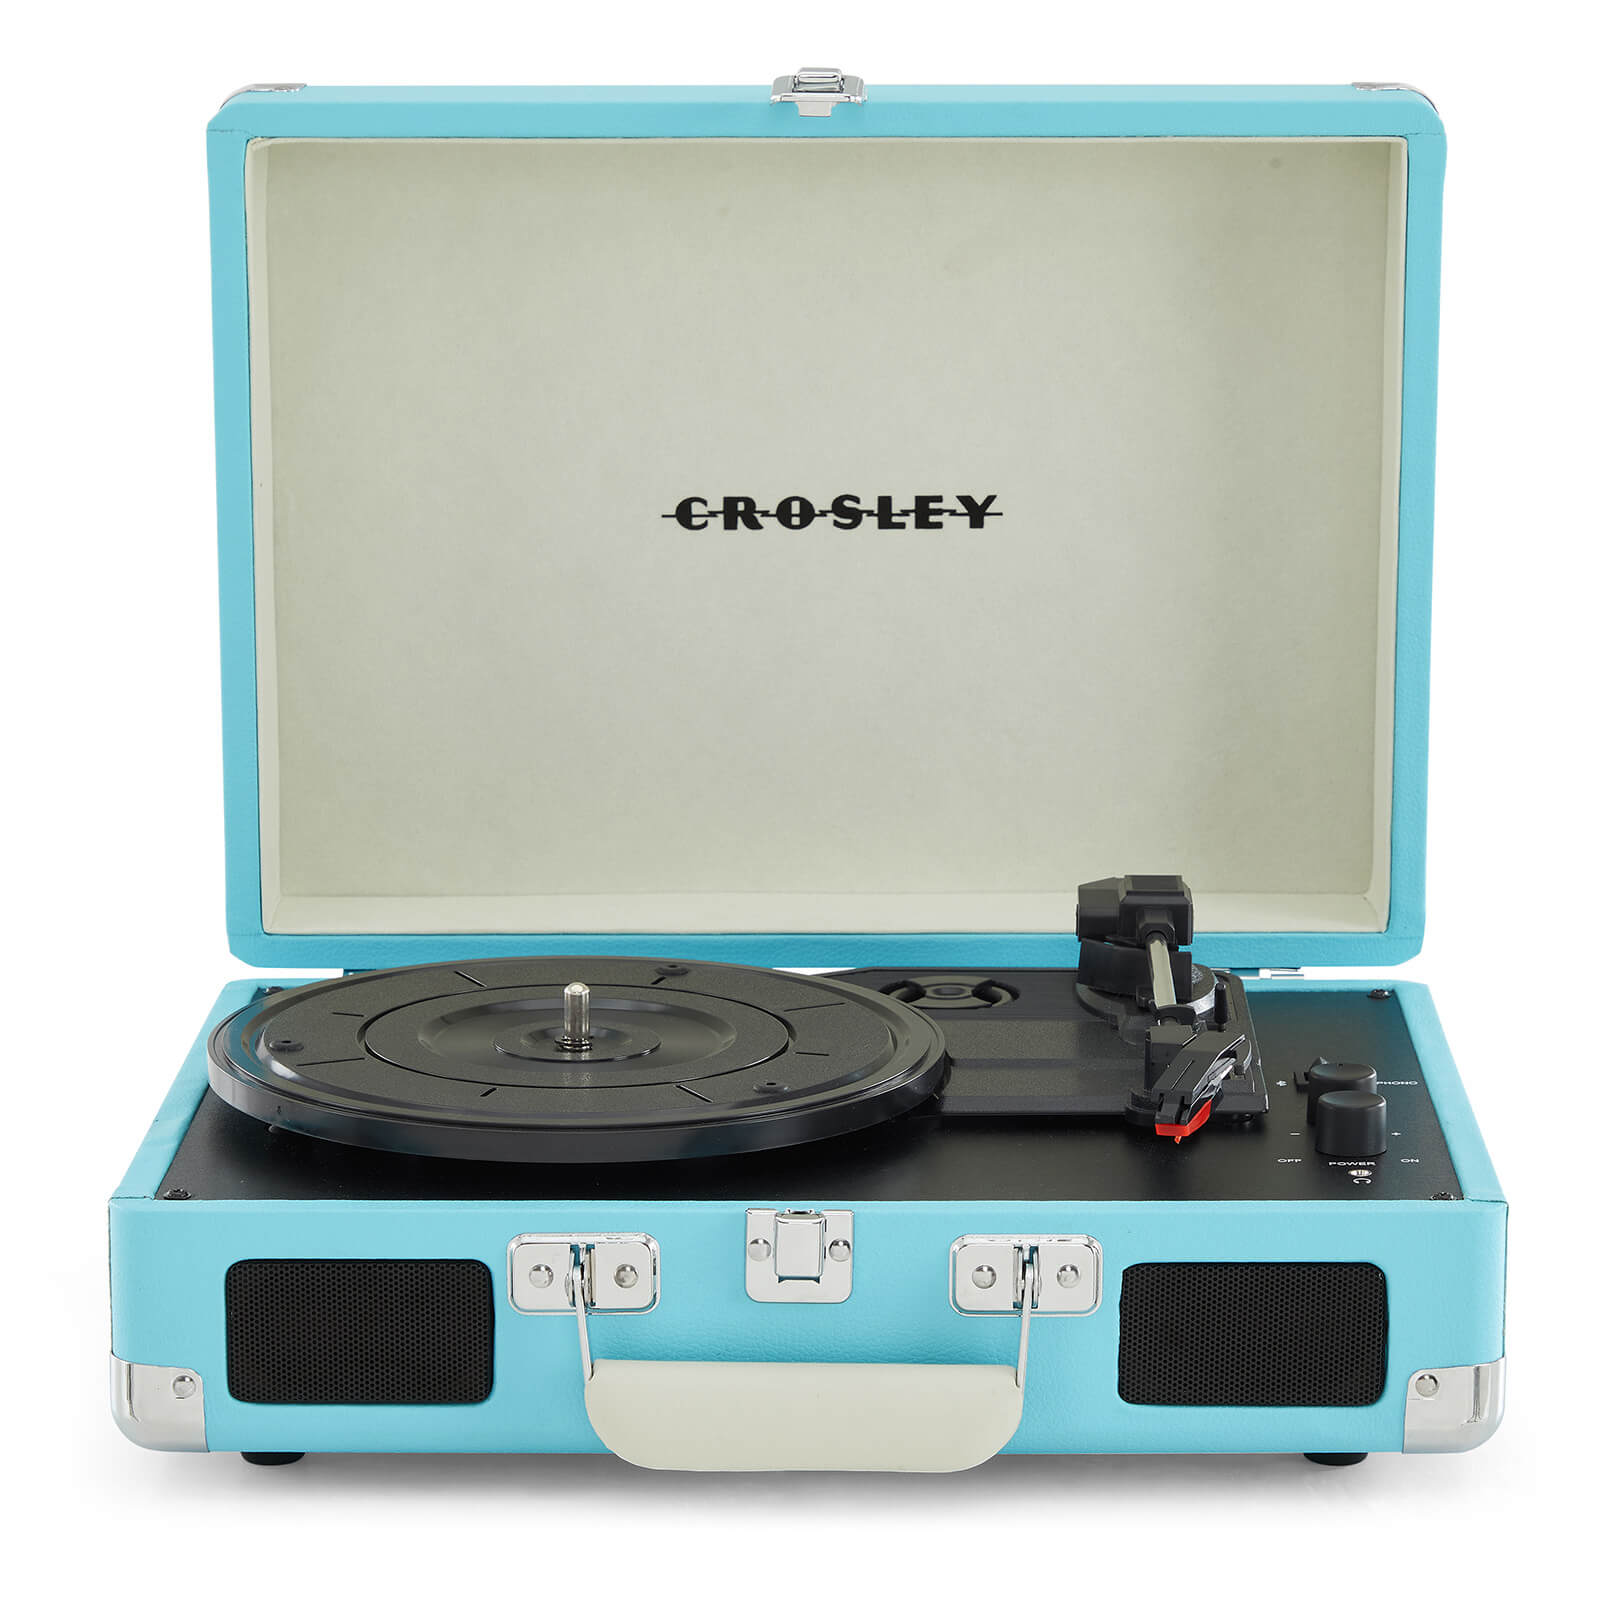 Crosley - Cruiser plus deluxe portable turntable - with bluetooth output - turquoise